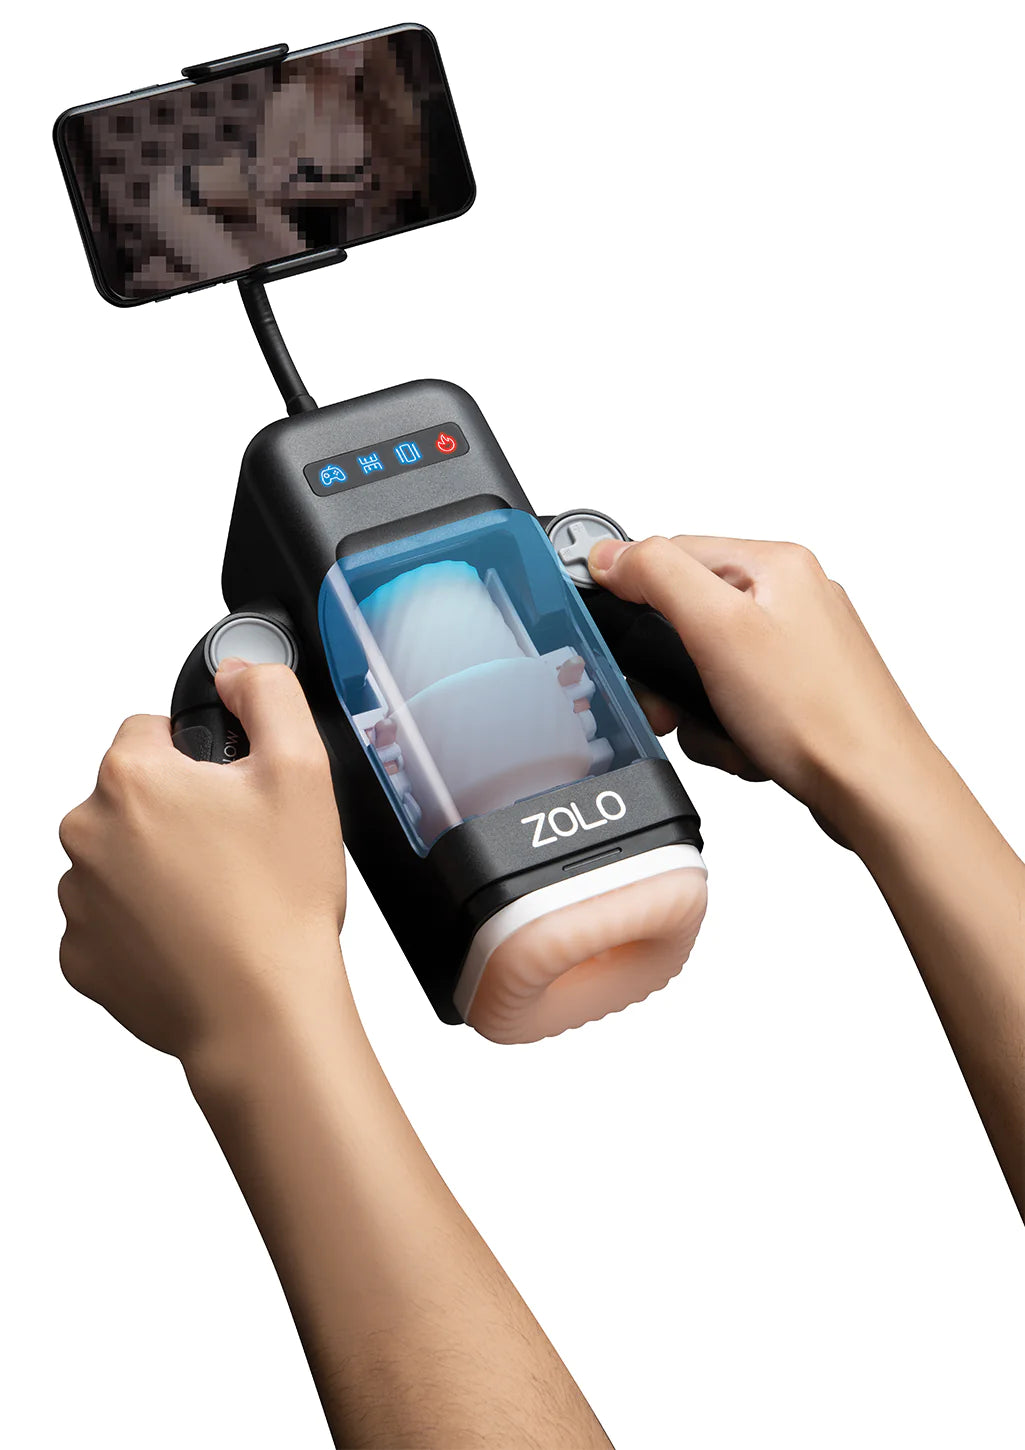 Image of Zolo Blowstation Rechargeable Masturbator looking down with two hands holding the controllers